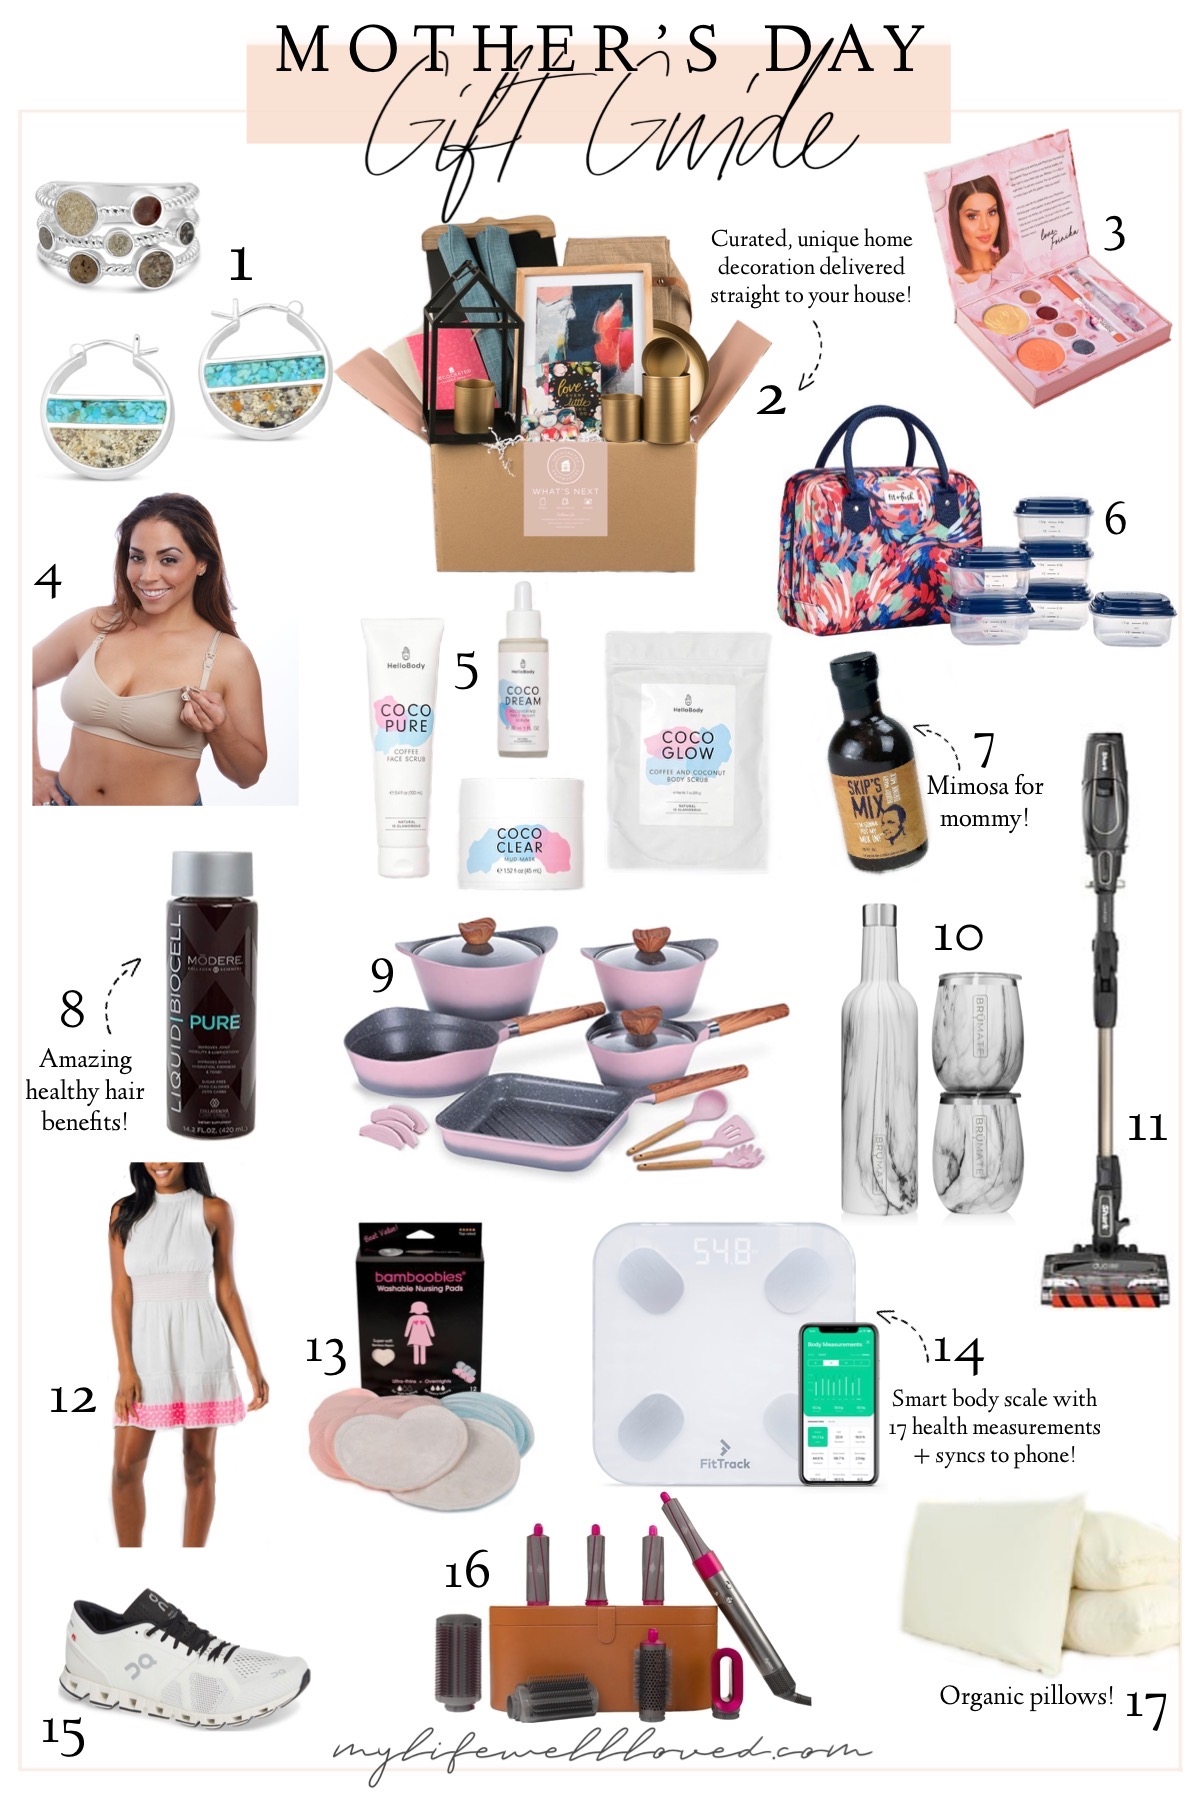 2022 Mother's Day Gift Guide: Top 22 Gifts for Mom